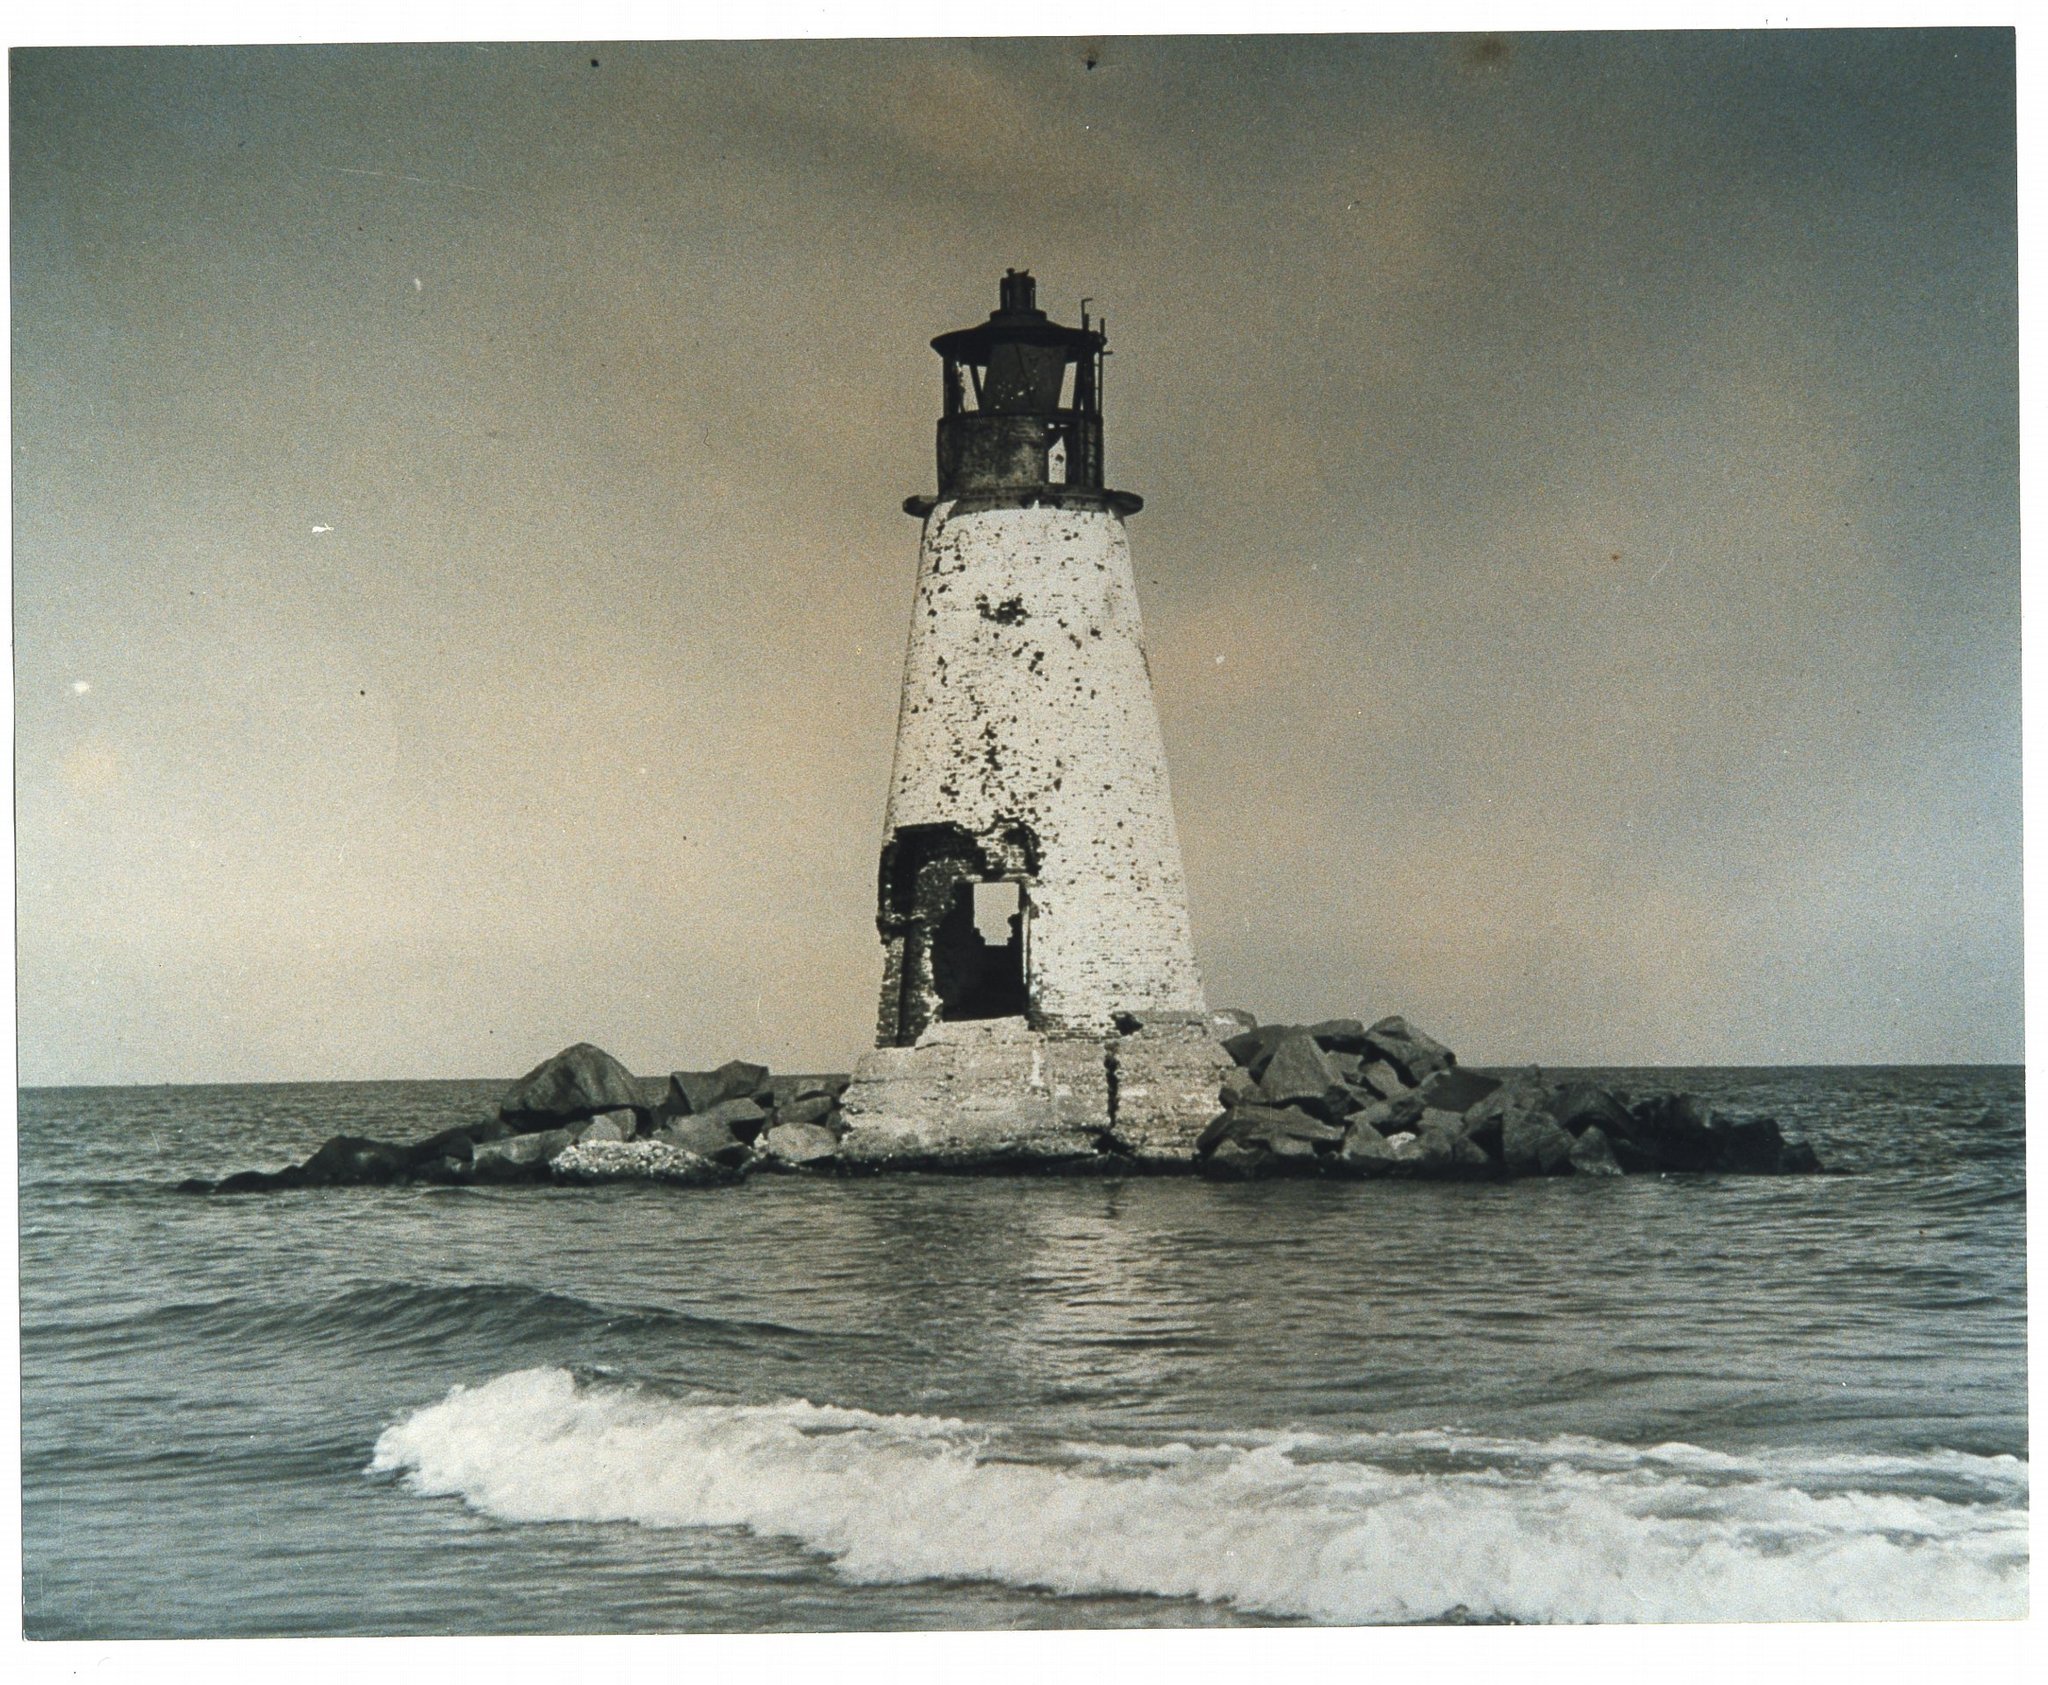 Pictures: The Back River Lighthouse remembered - Daily Press